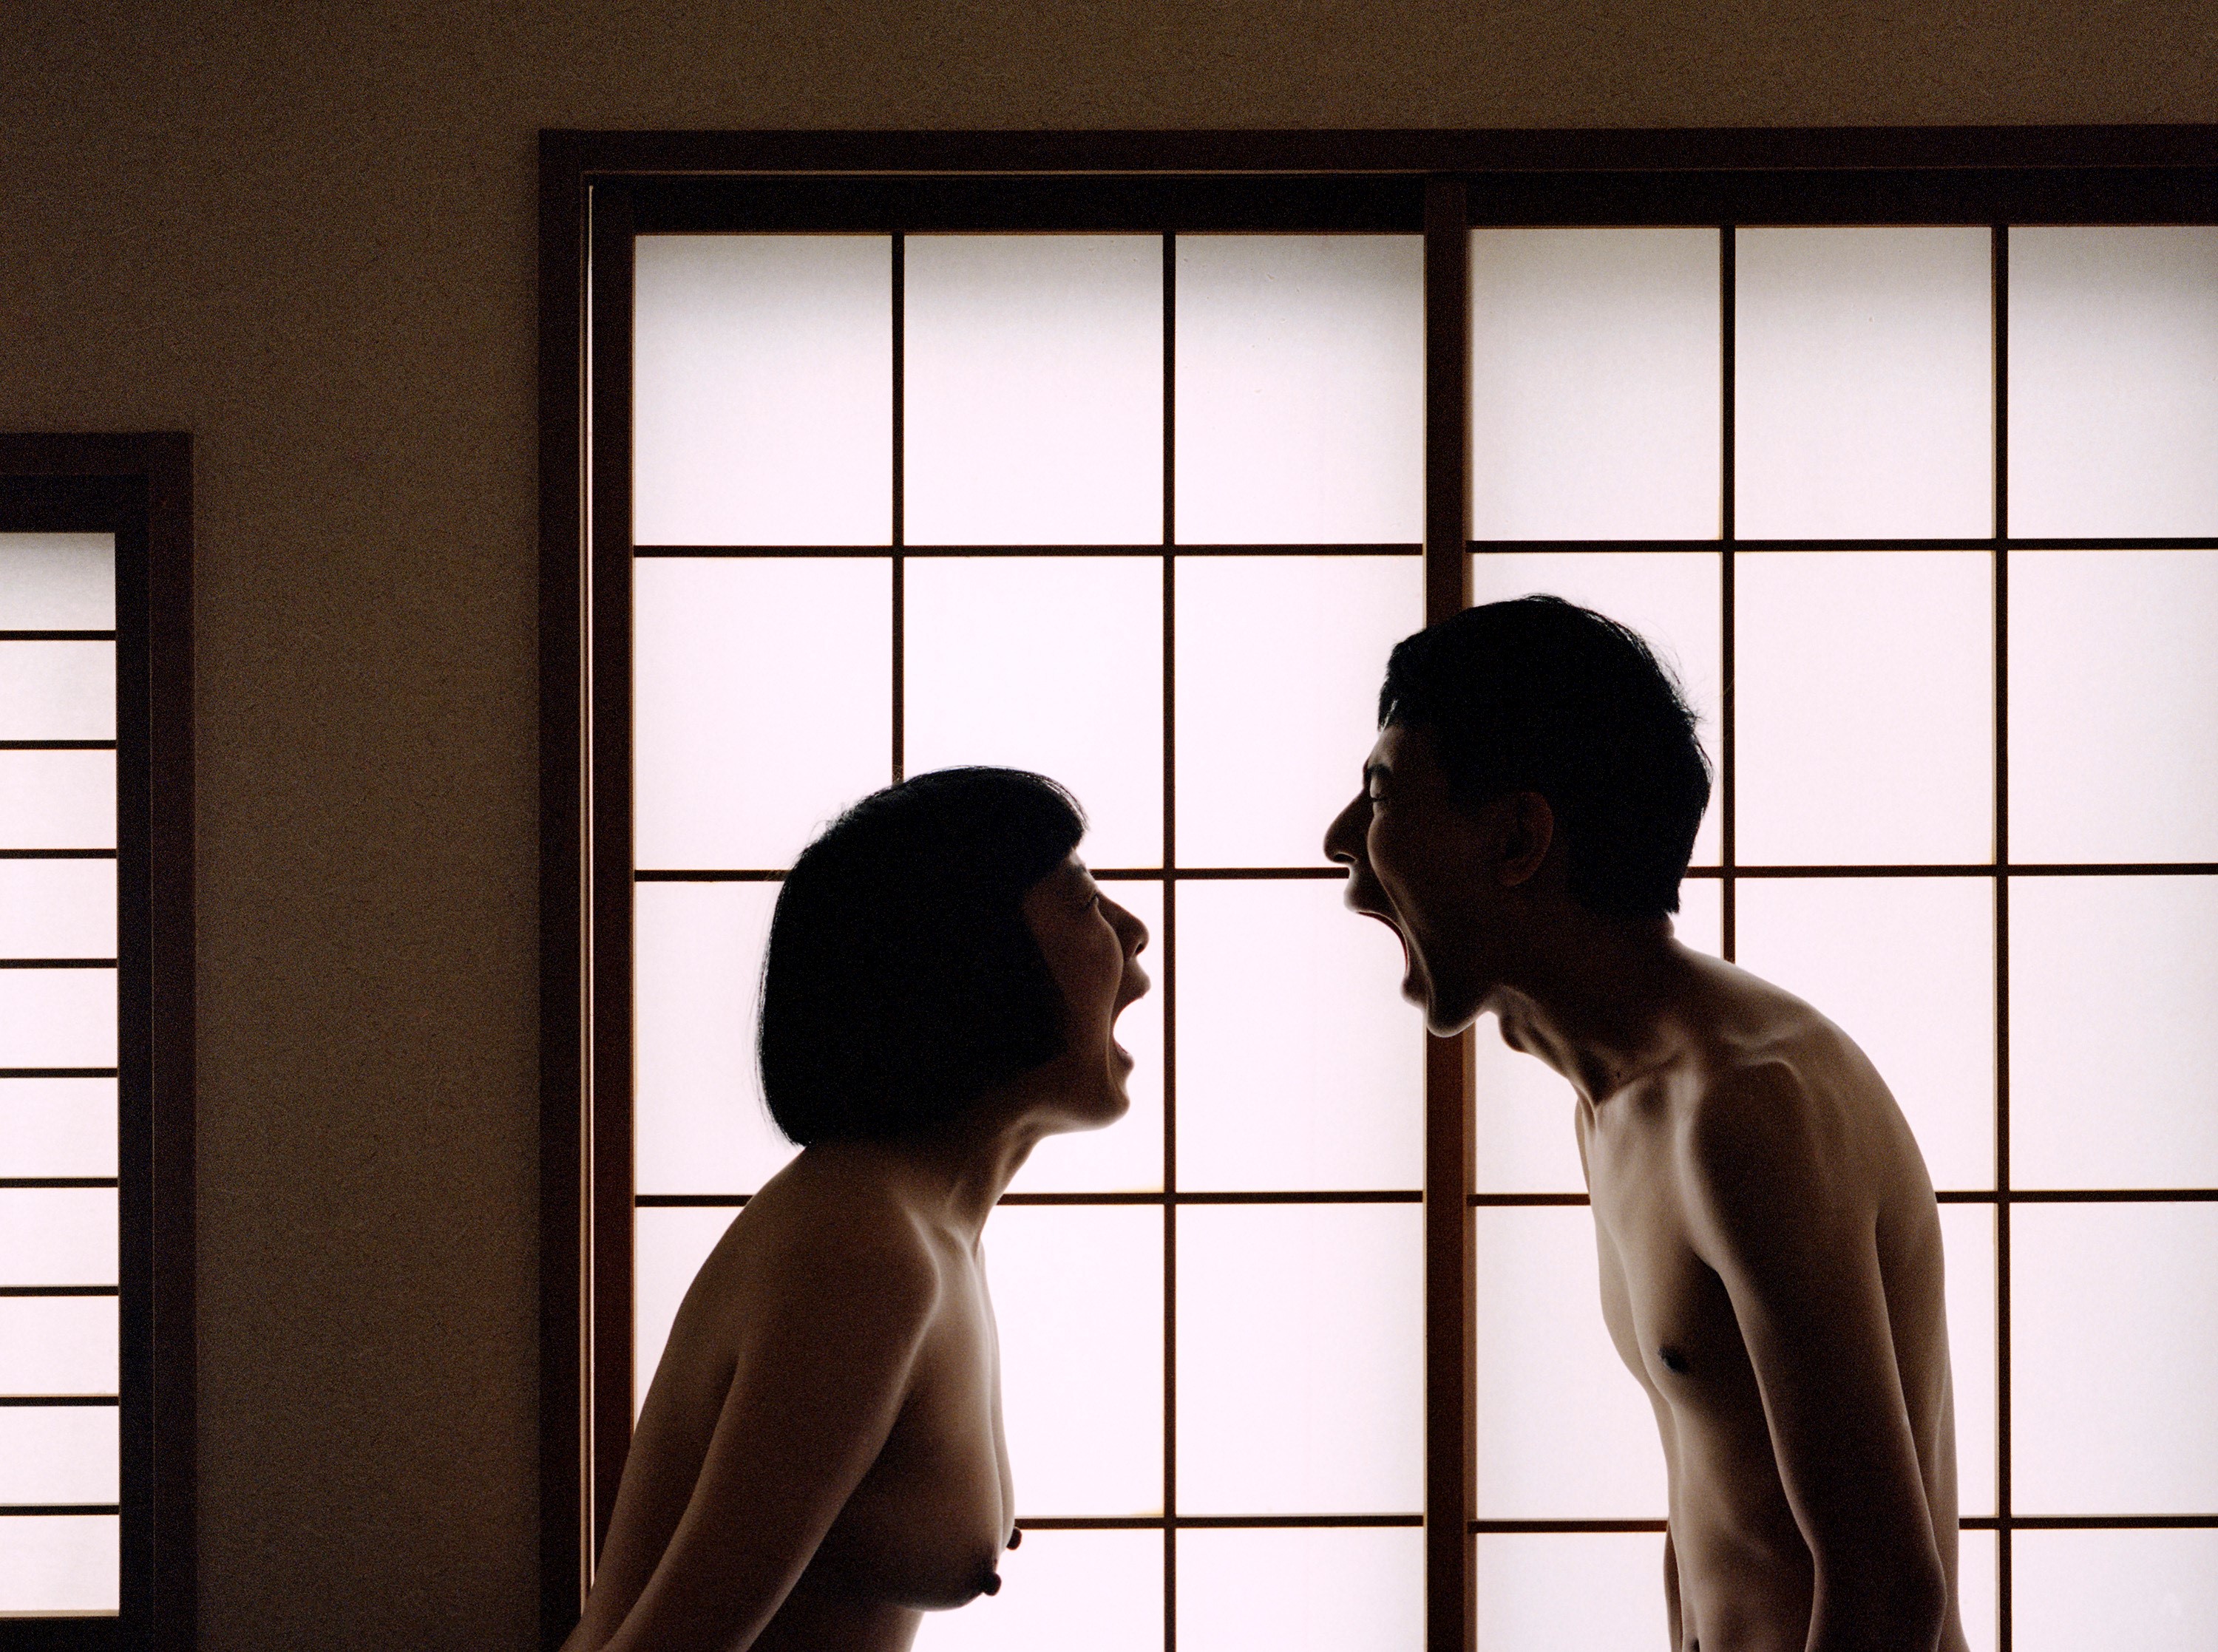 Pixy and Moro are facing each other, naked and screaming, silhouetted by a shoji.